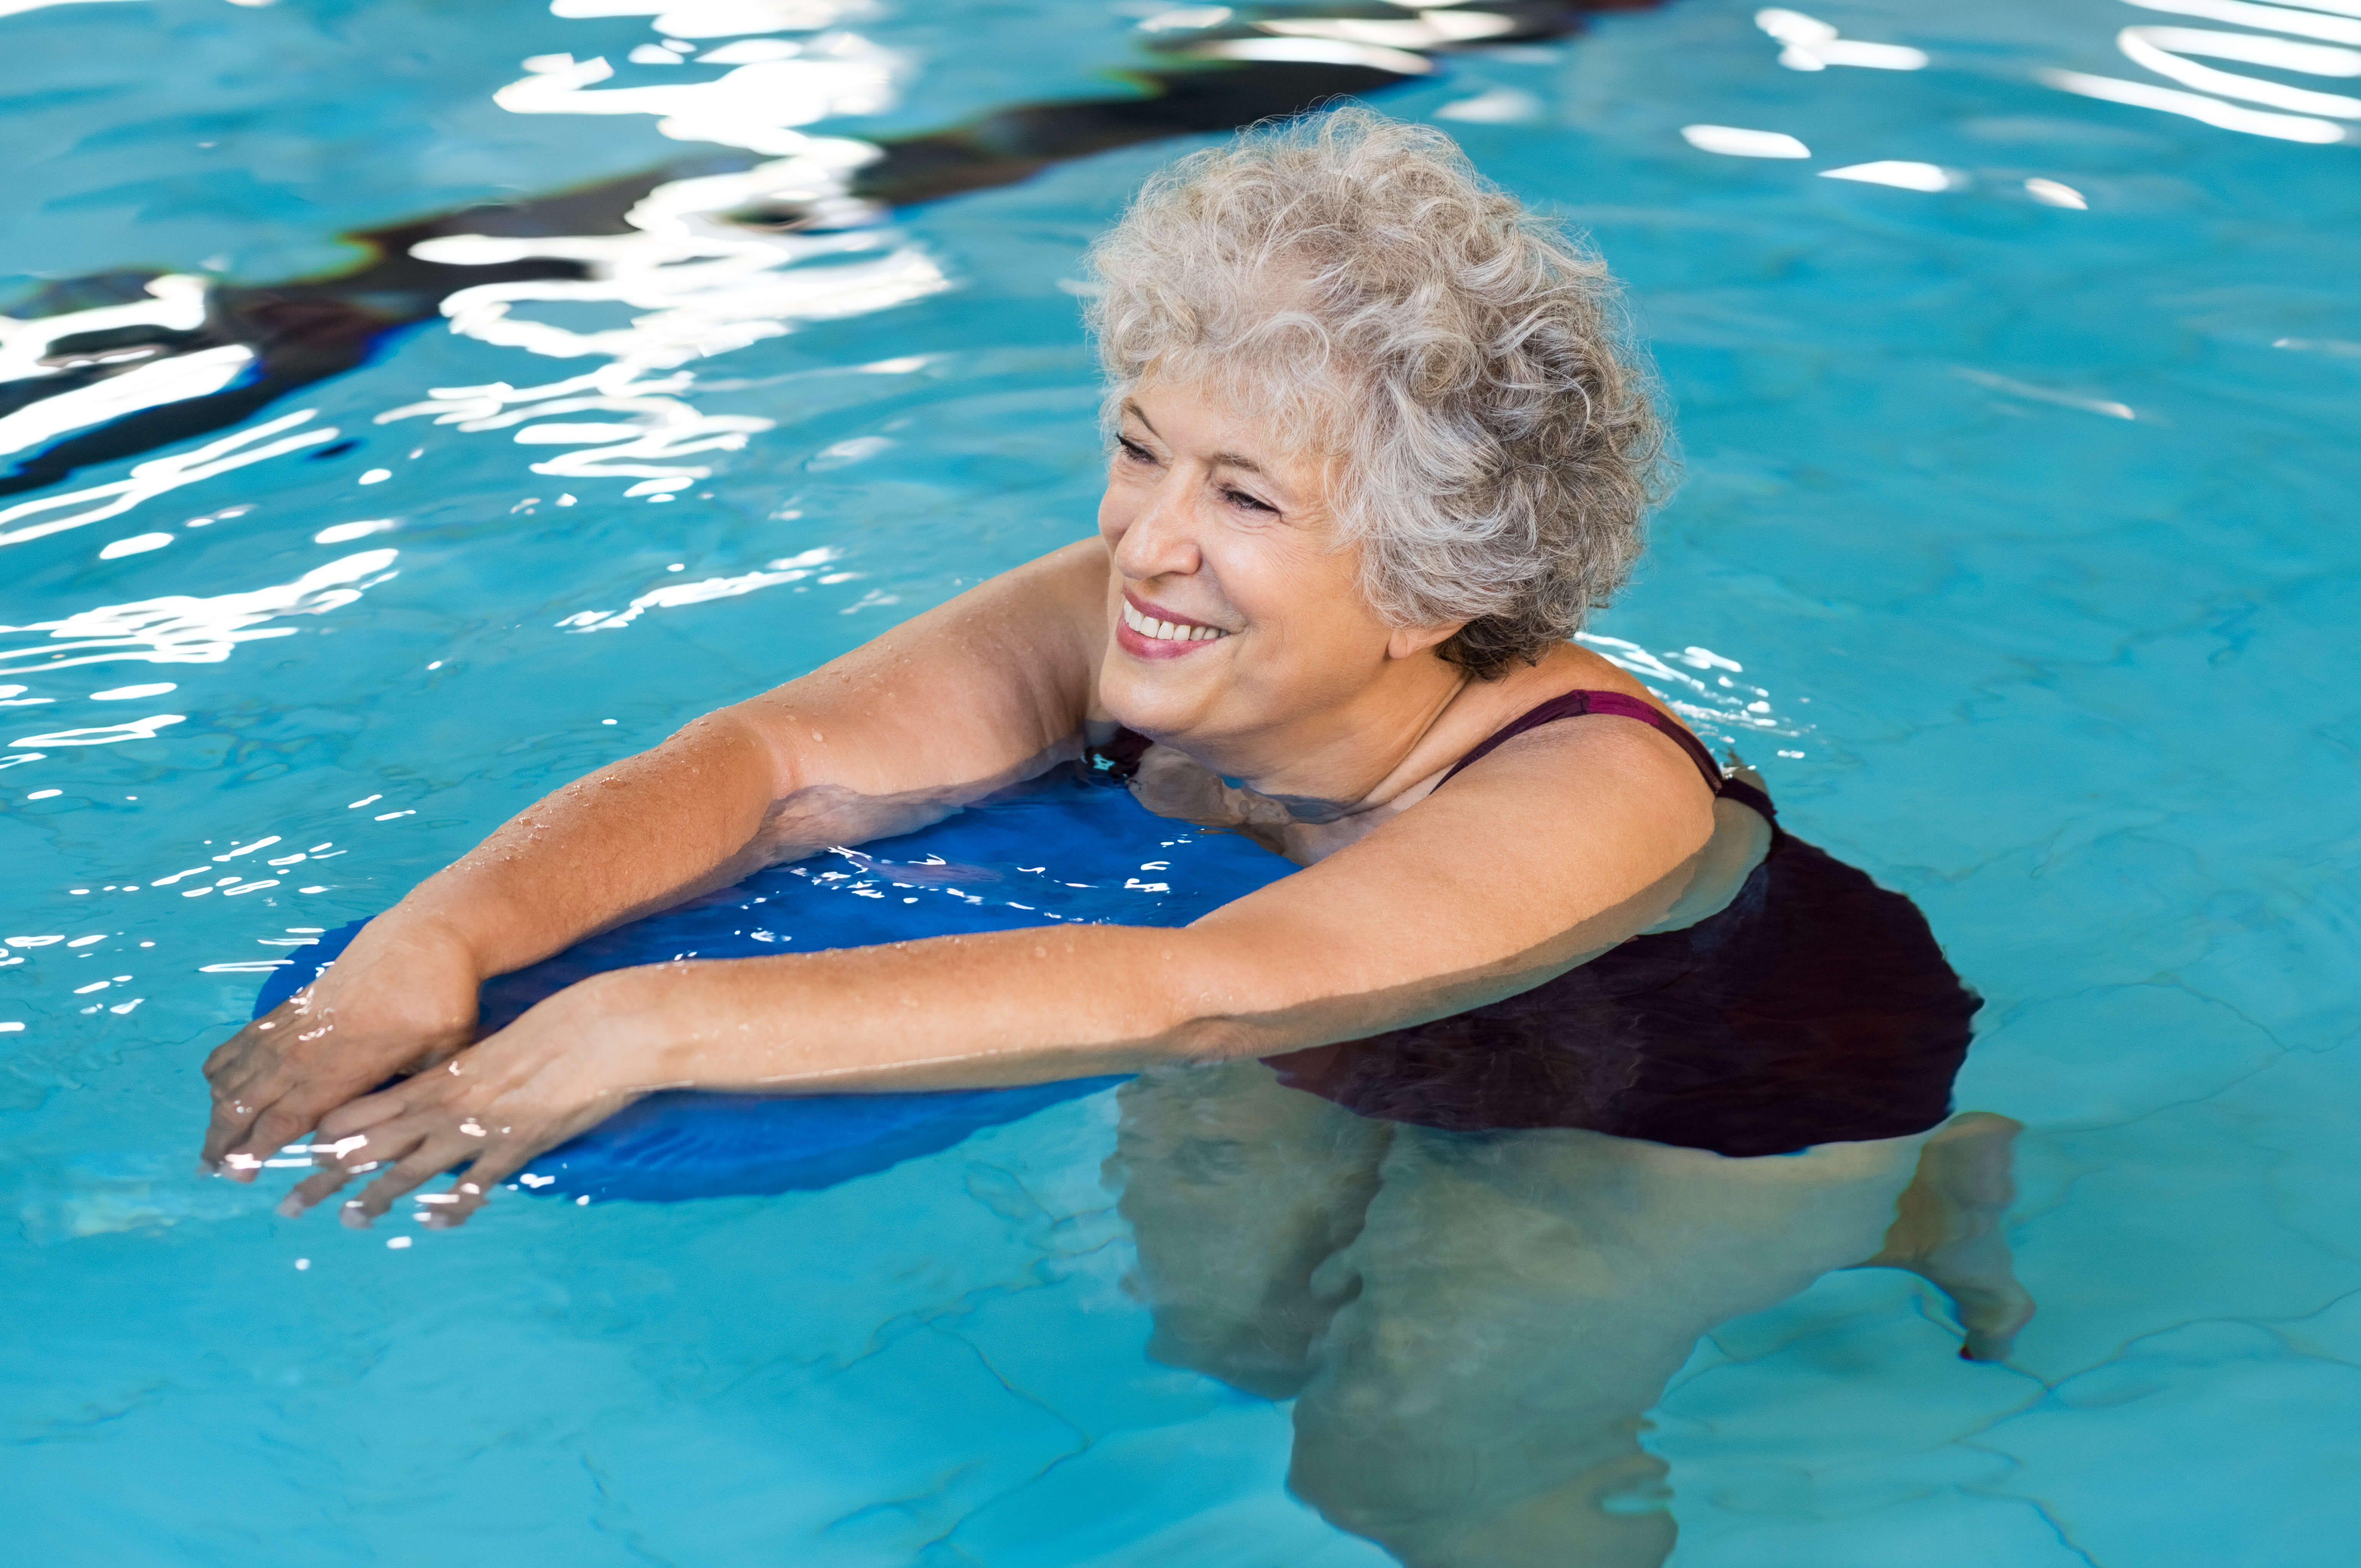 Two Features of Aquatic Therapy